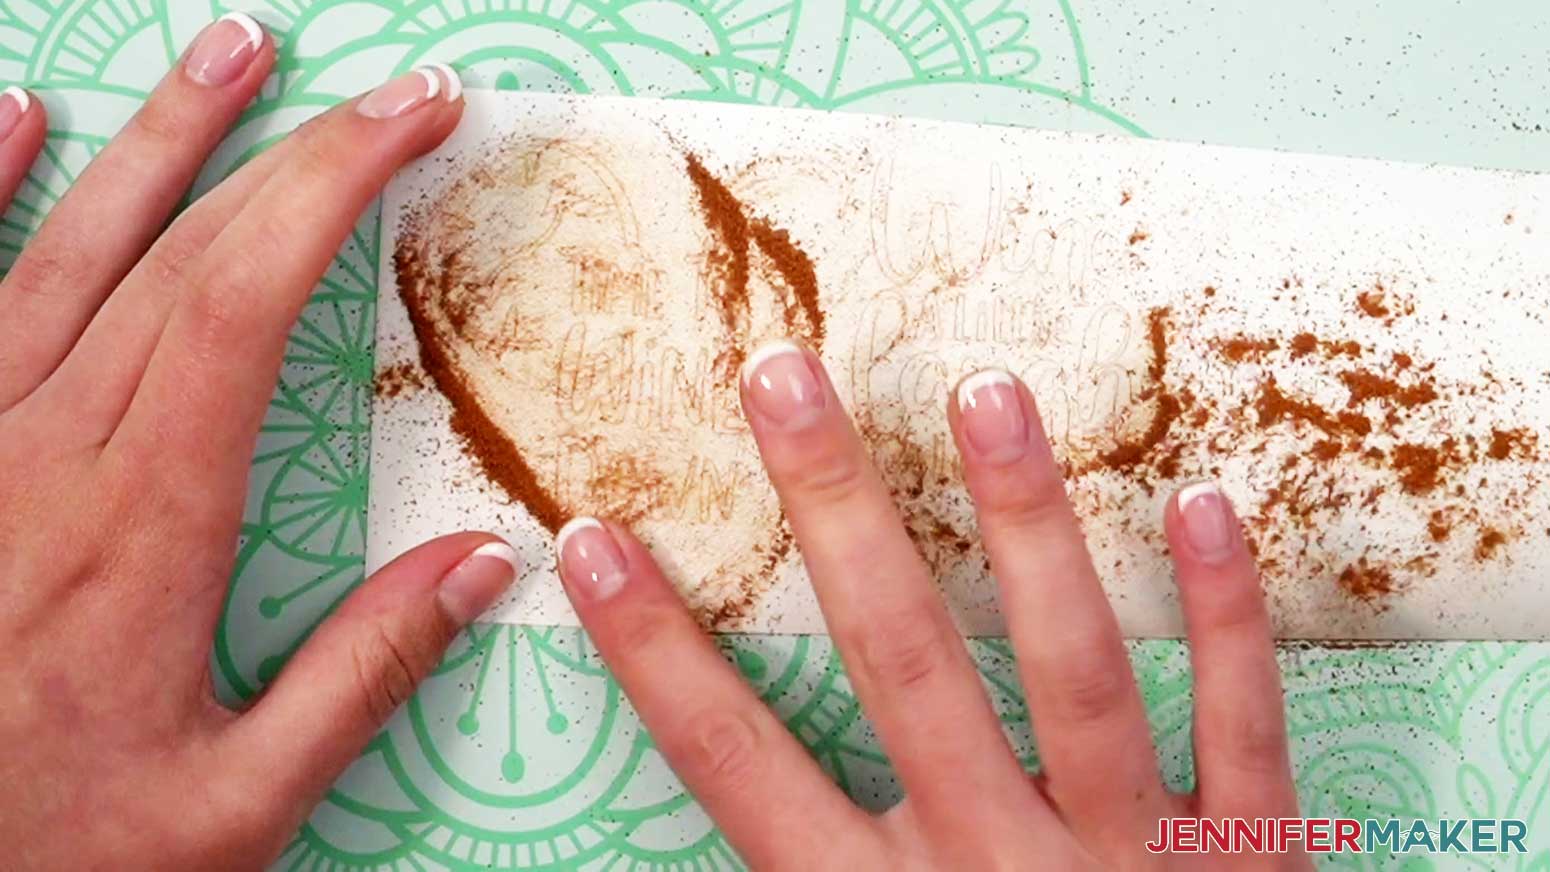 Rub the cinnamon powder into the cracks where the vinyl is cut to make it easier to weed.